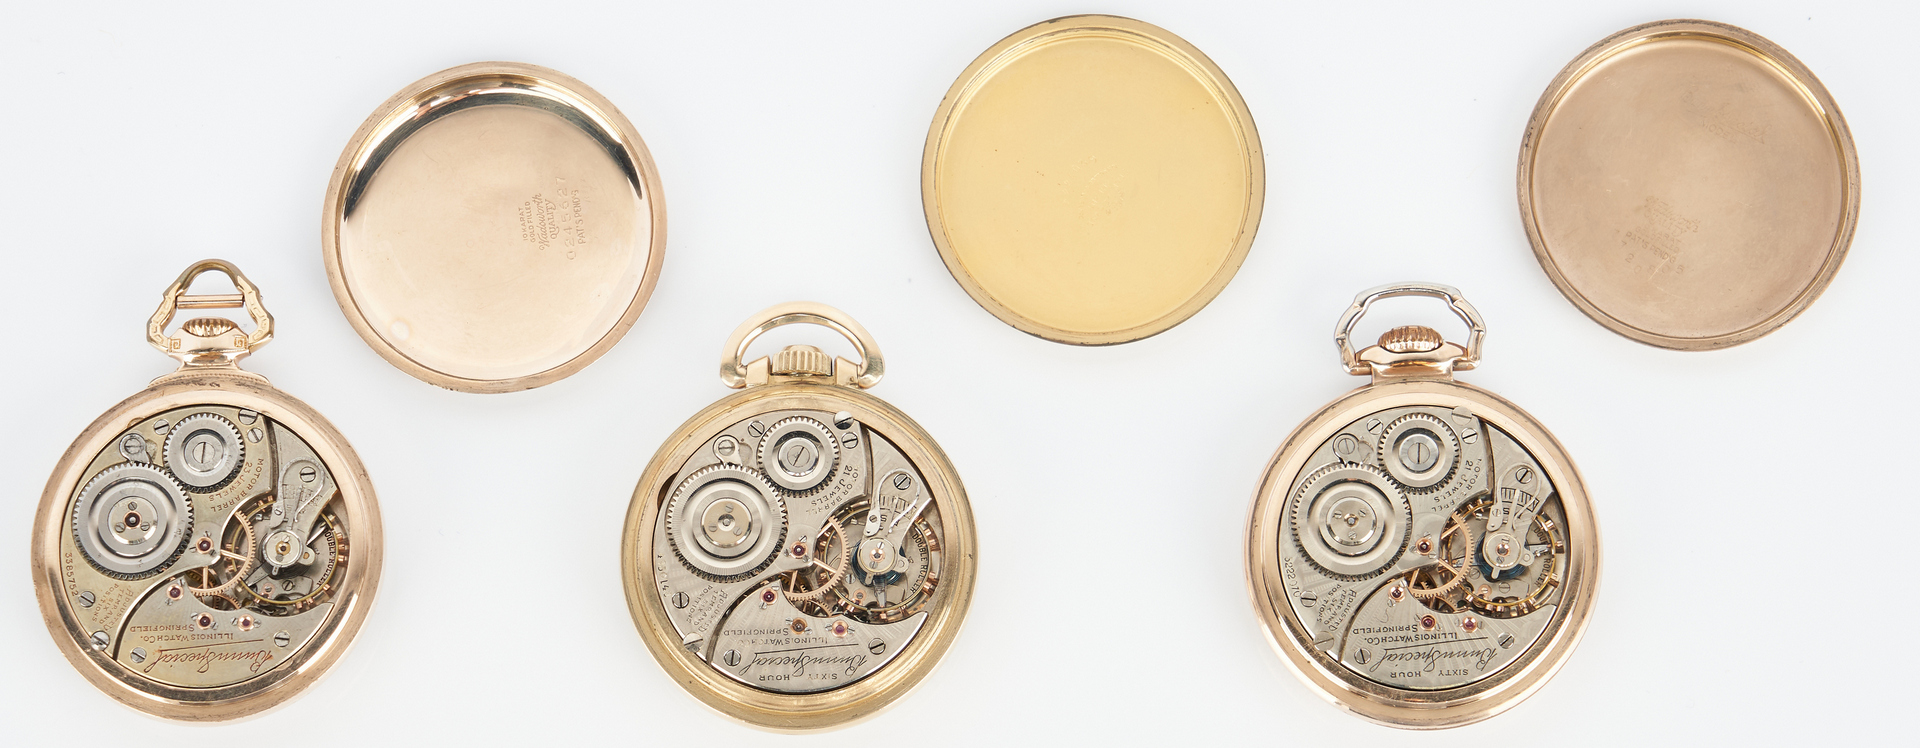 Lot 828: 3 Illinois Bunn Special Pocket Watches